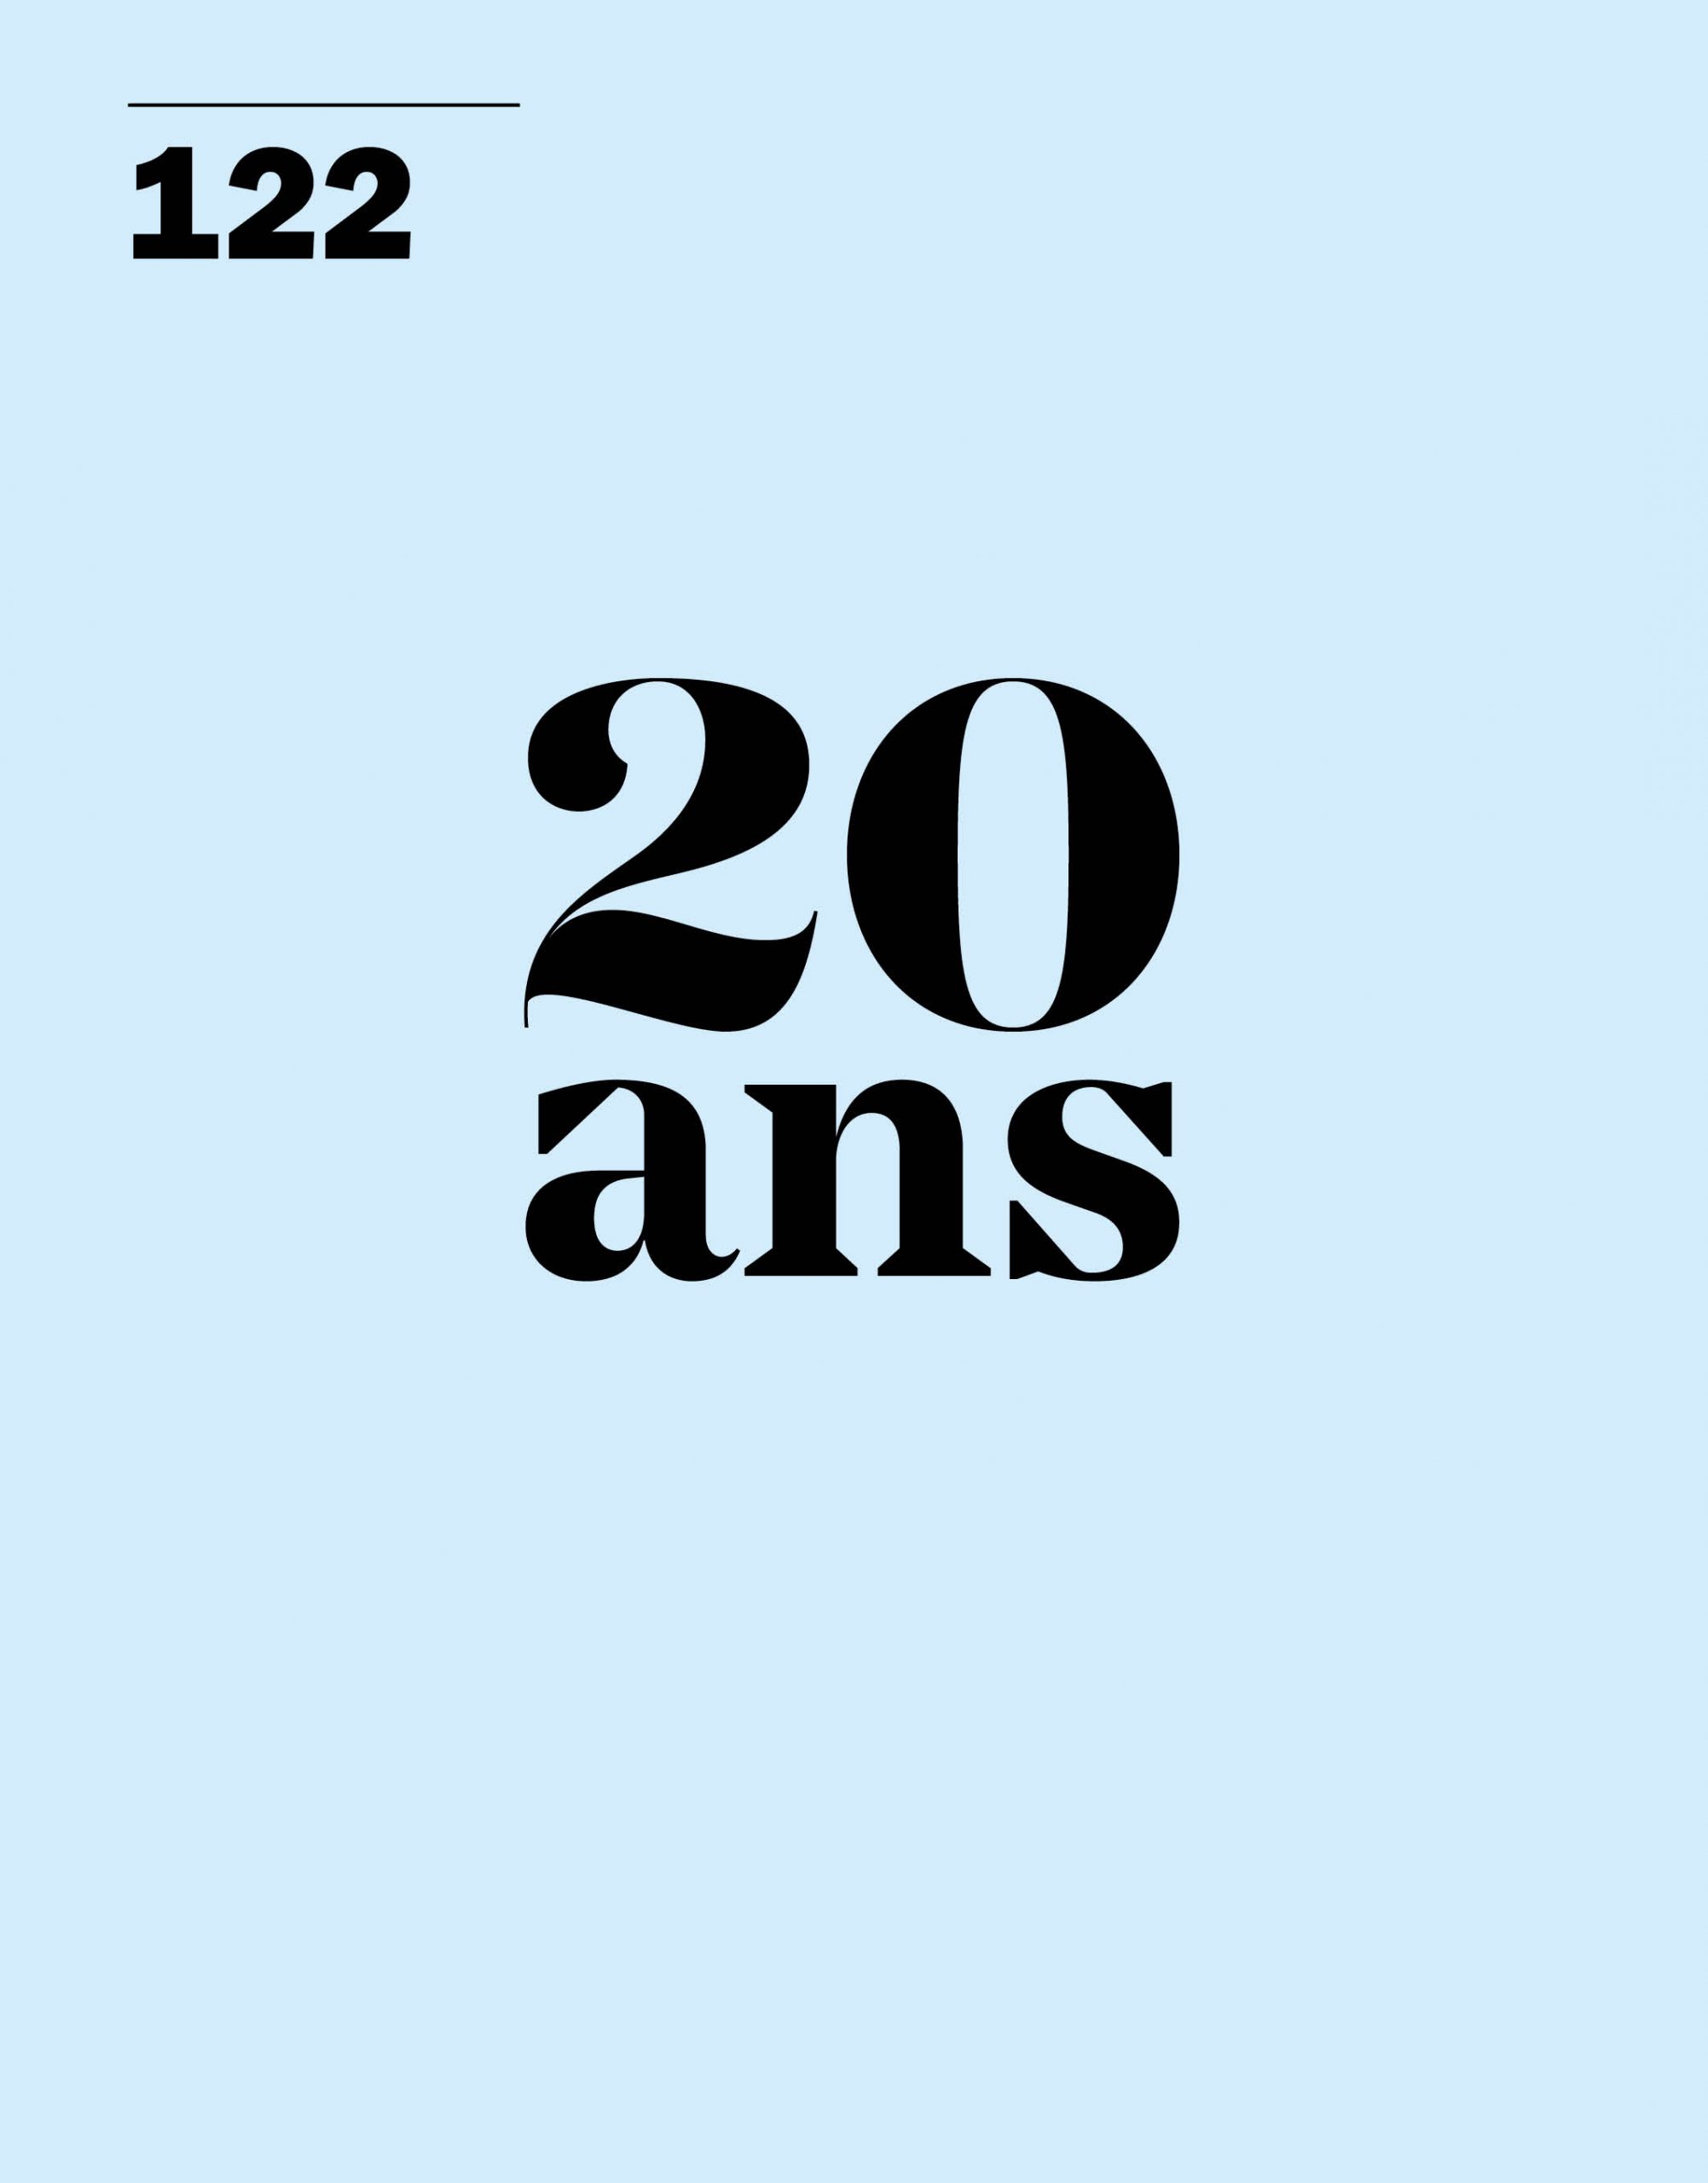 Guillaume Bardet - 20 years